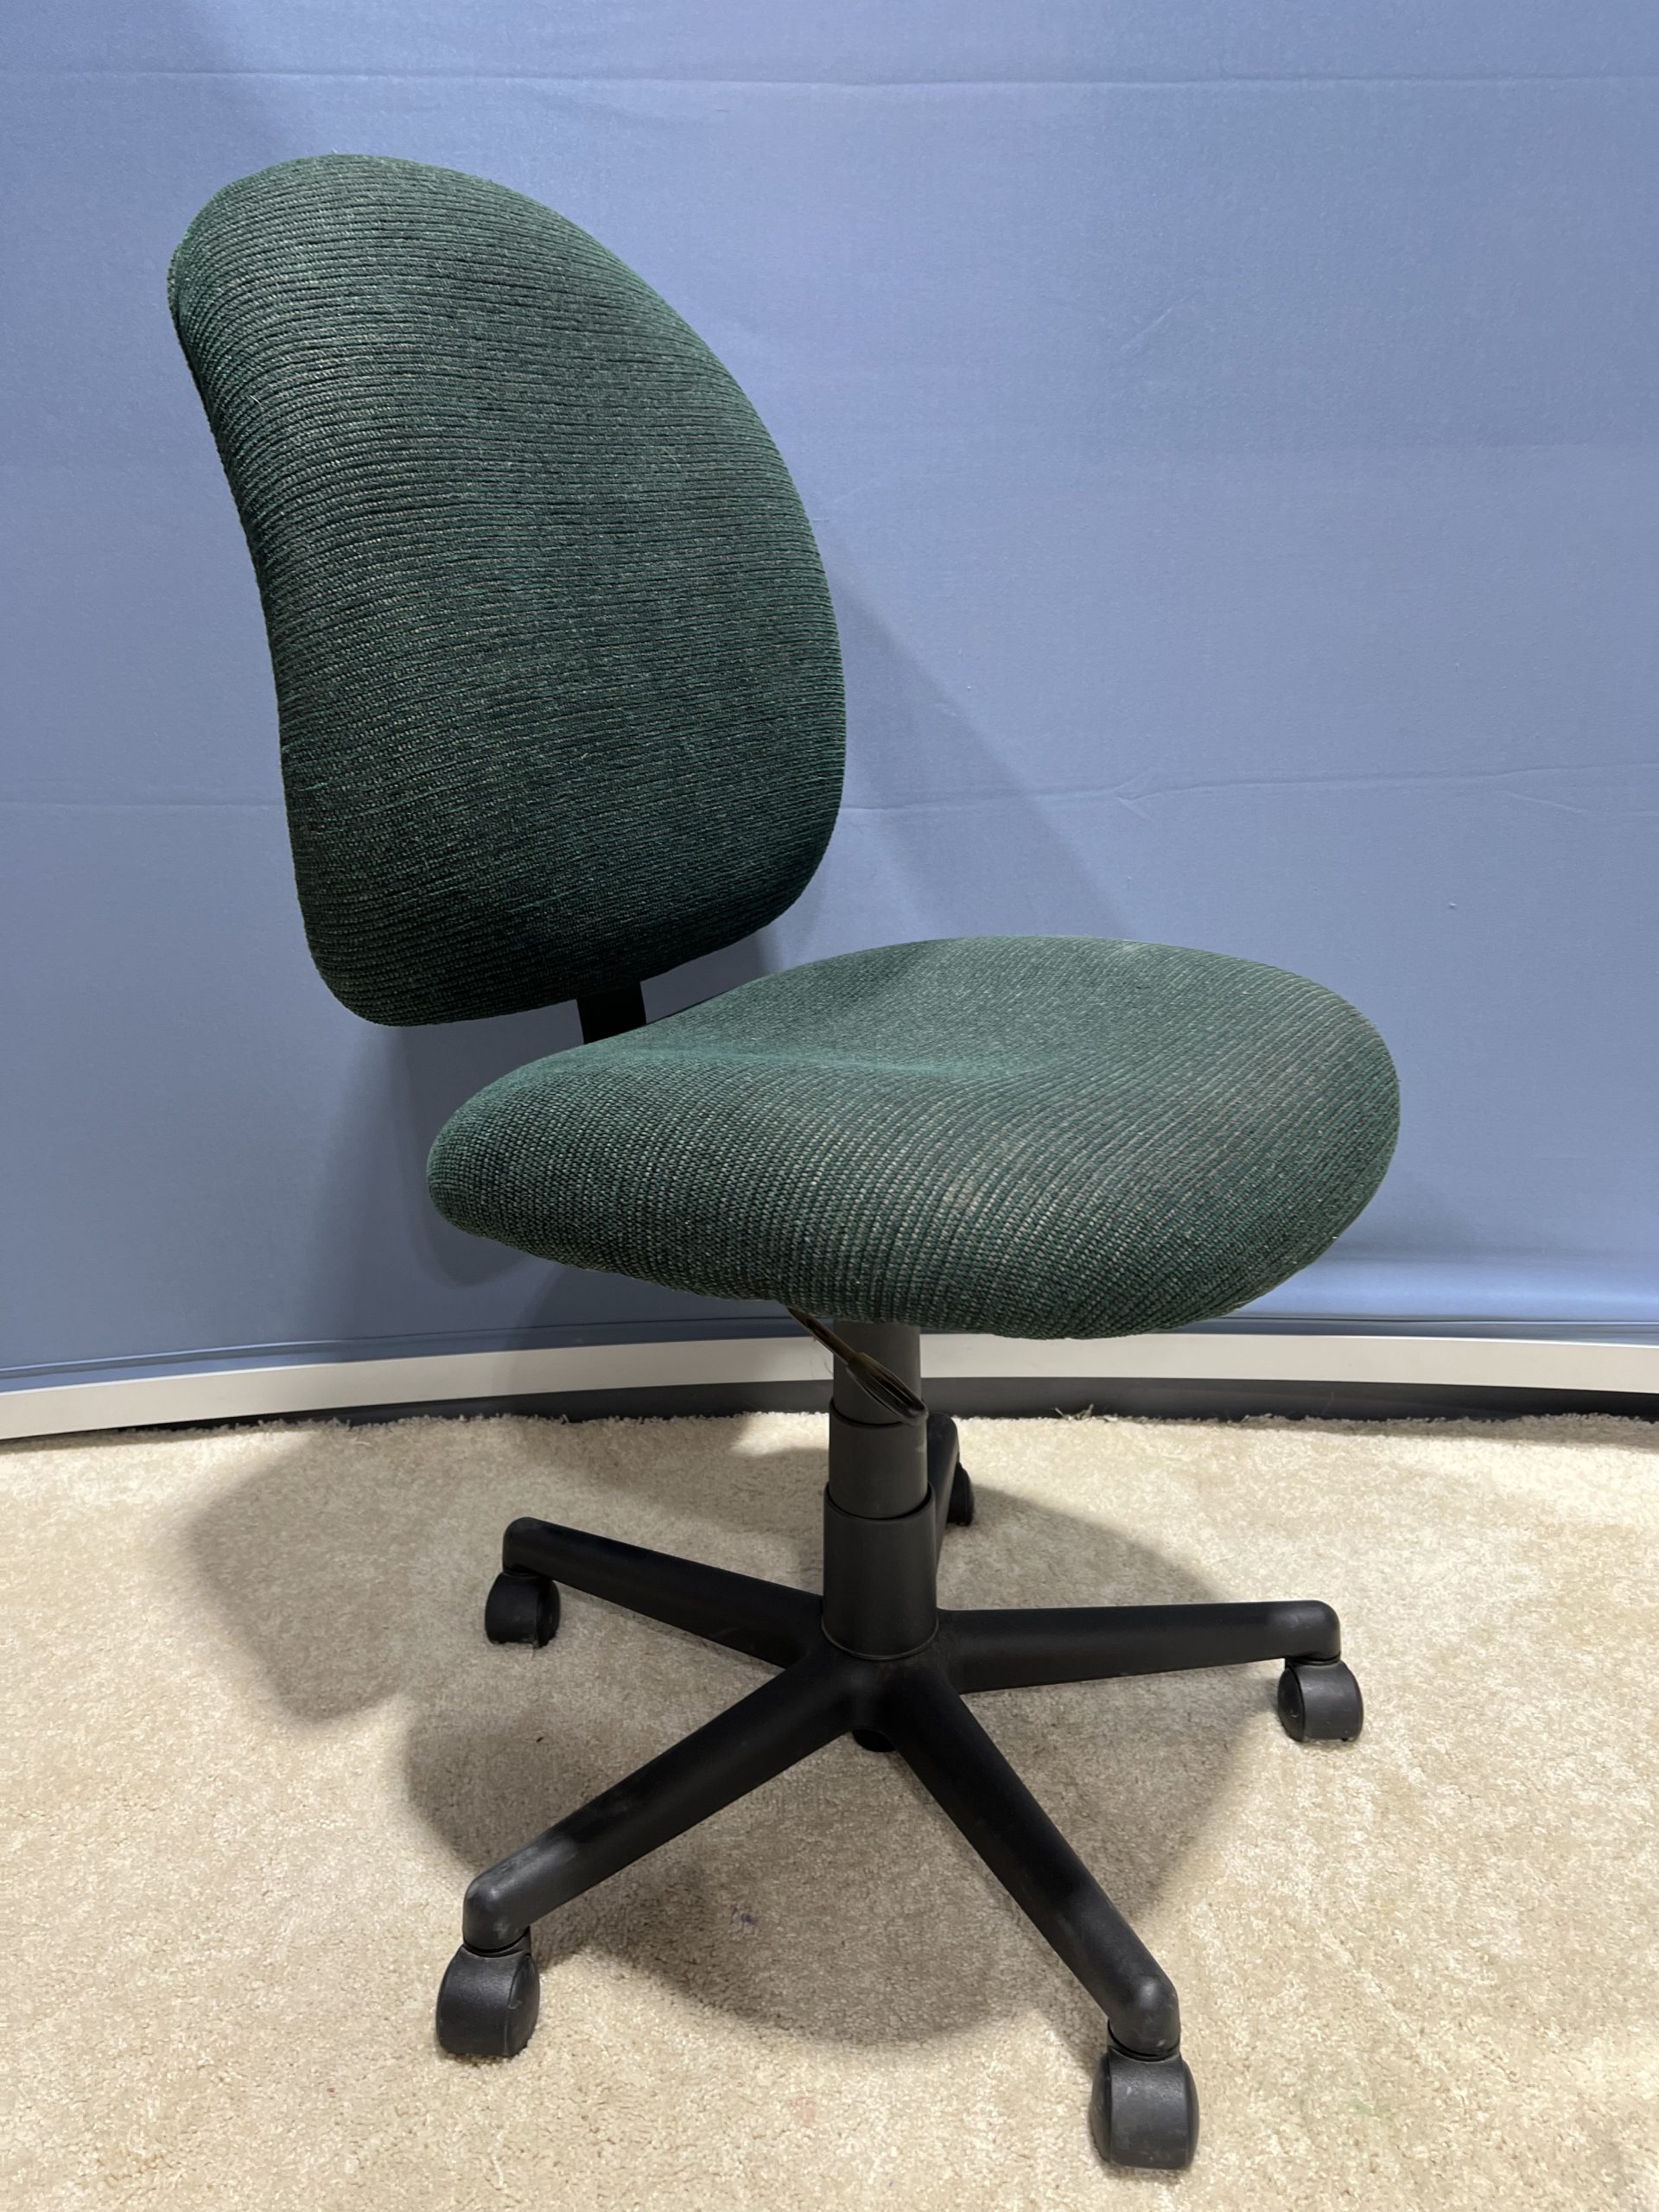 Chair Multitask Green No Arms 1 of 1-image